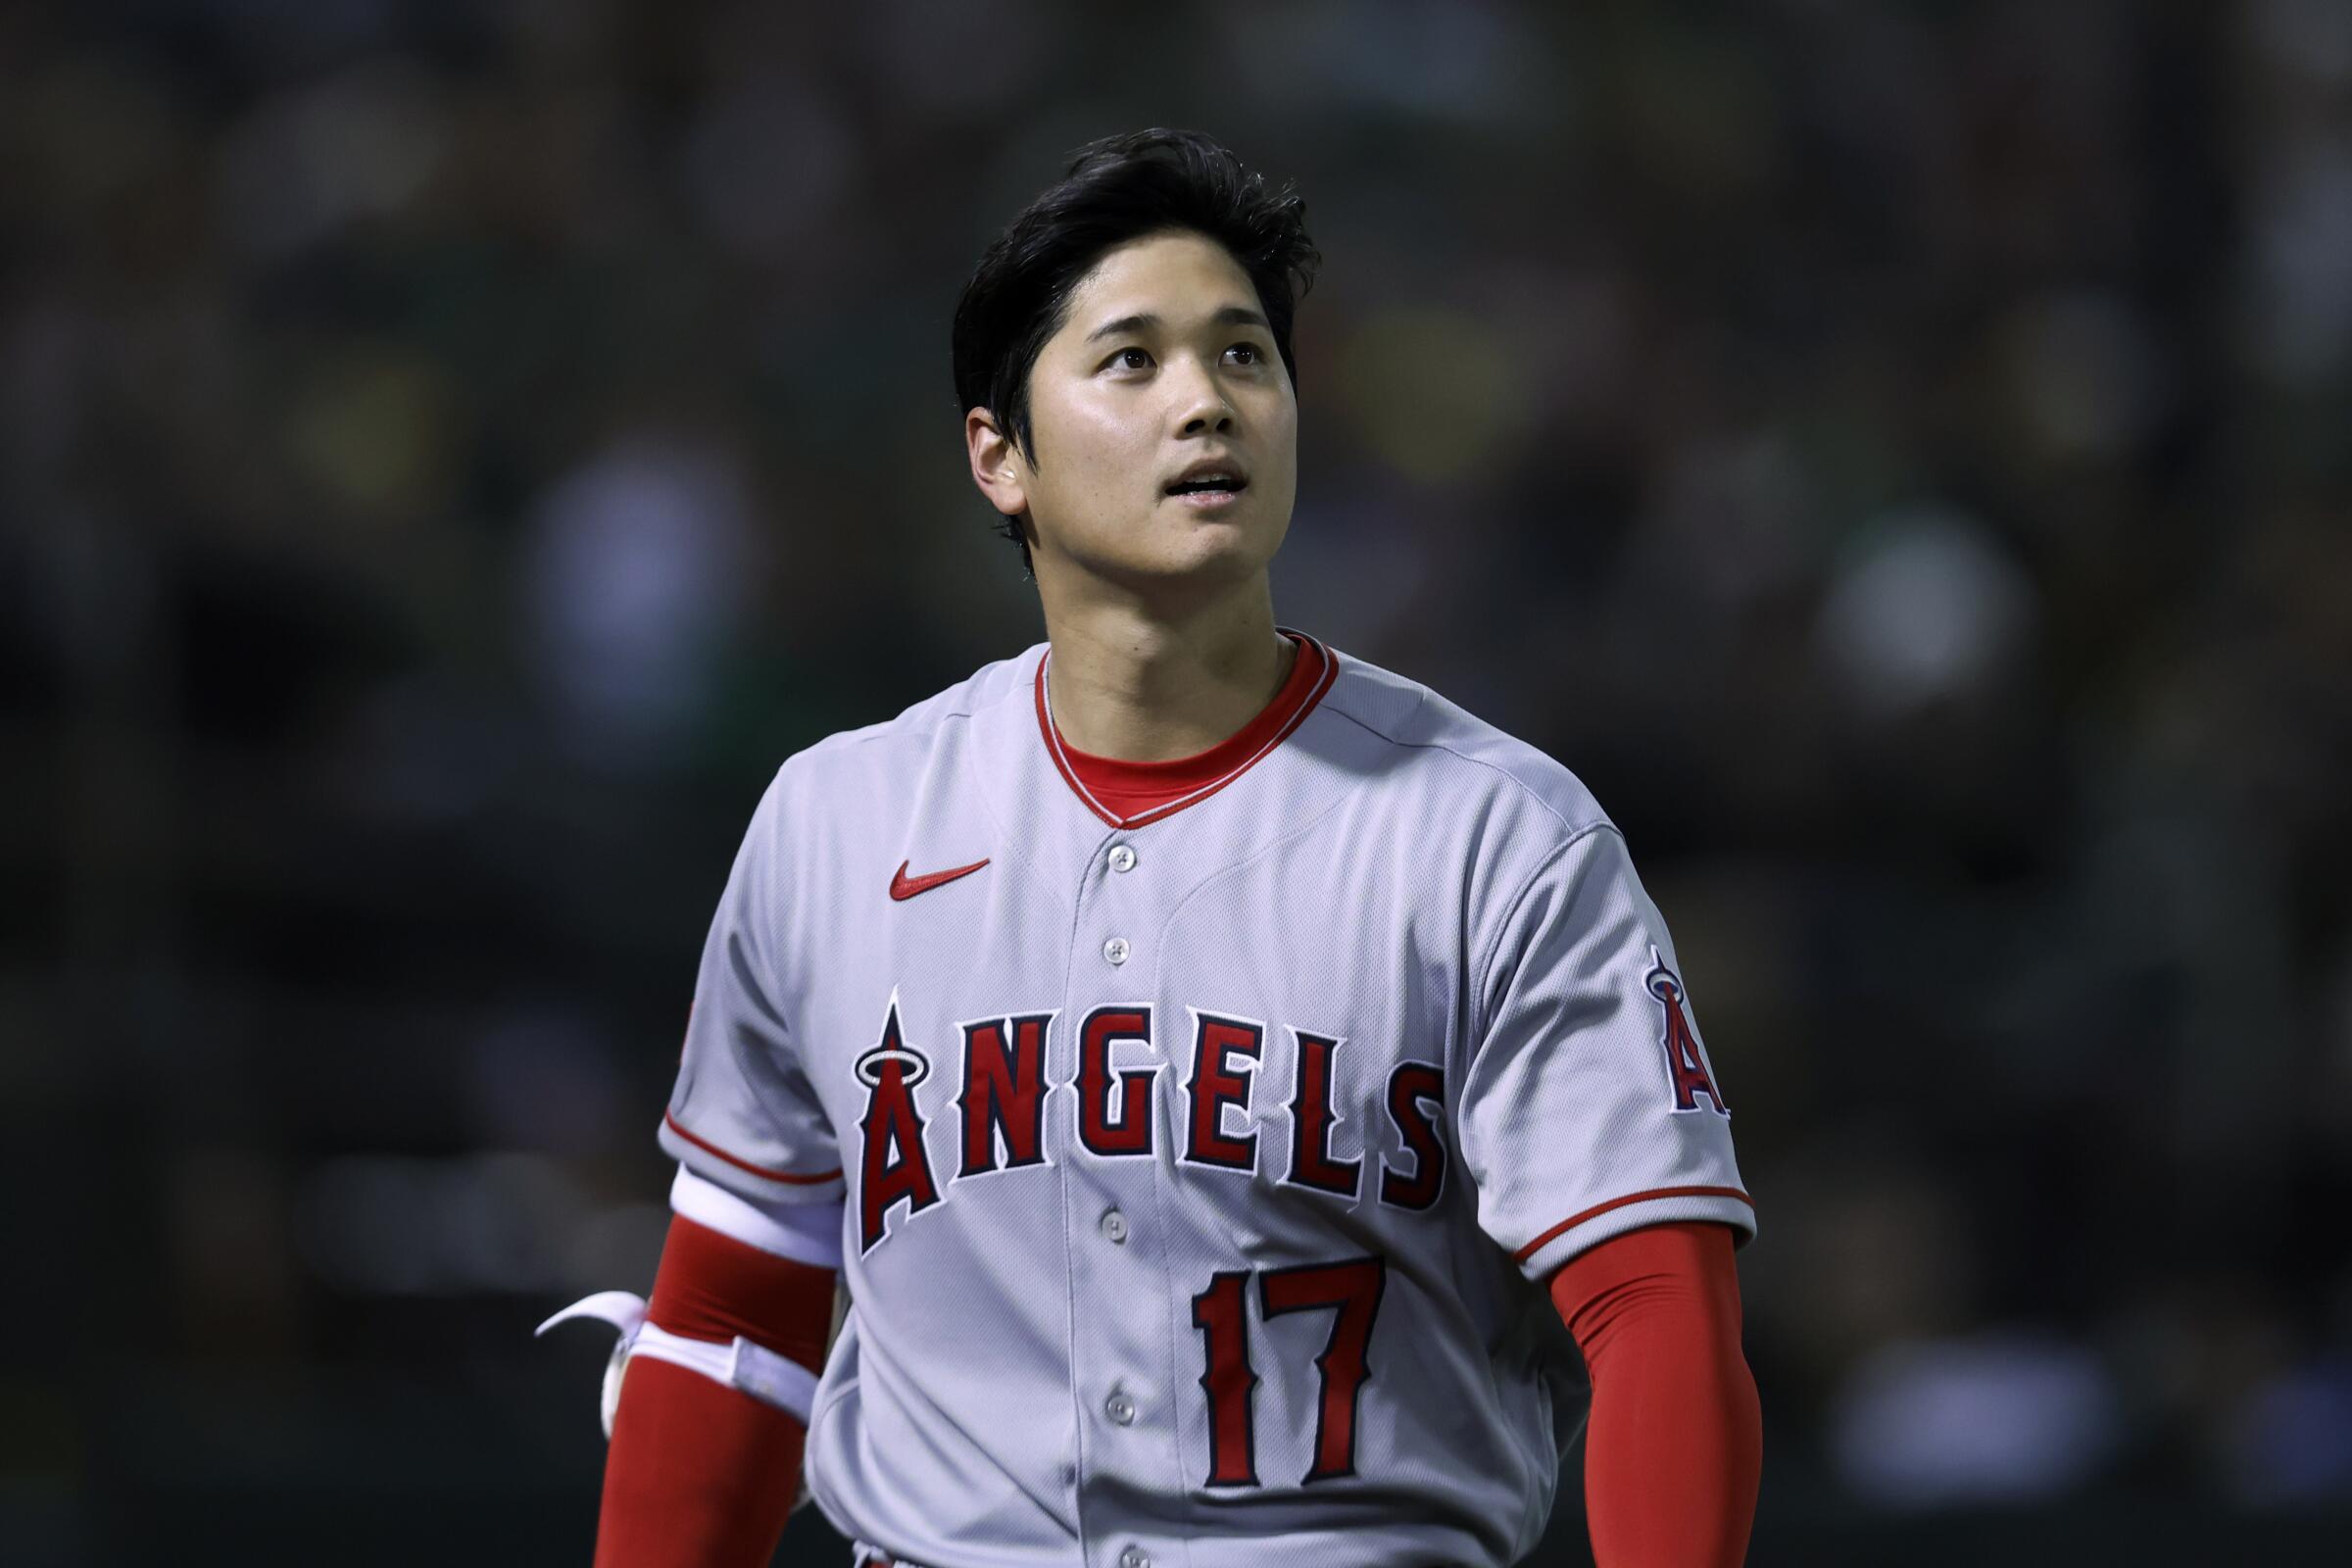 Angels star Shohei Ohtani walks back to the dugout after striking out against the A's on Thursday.